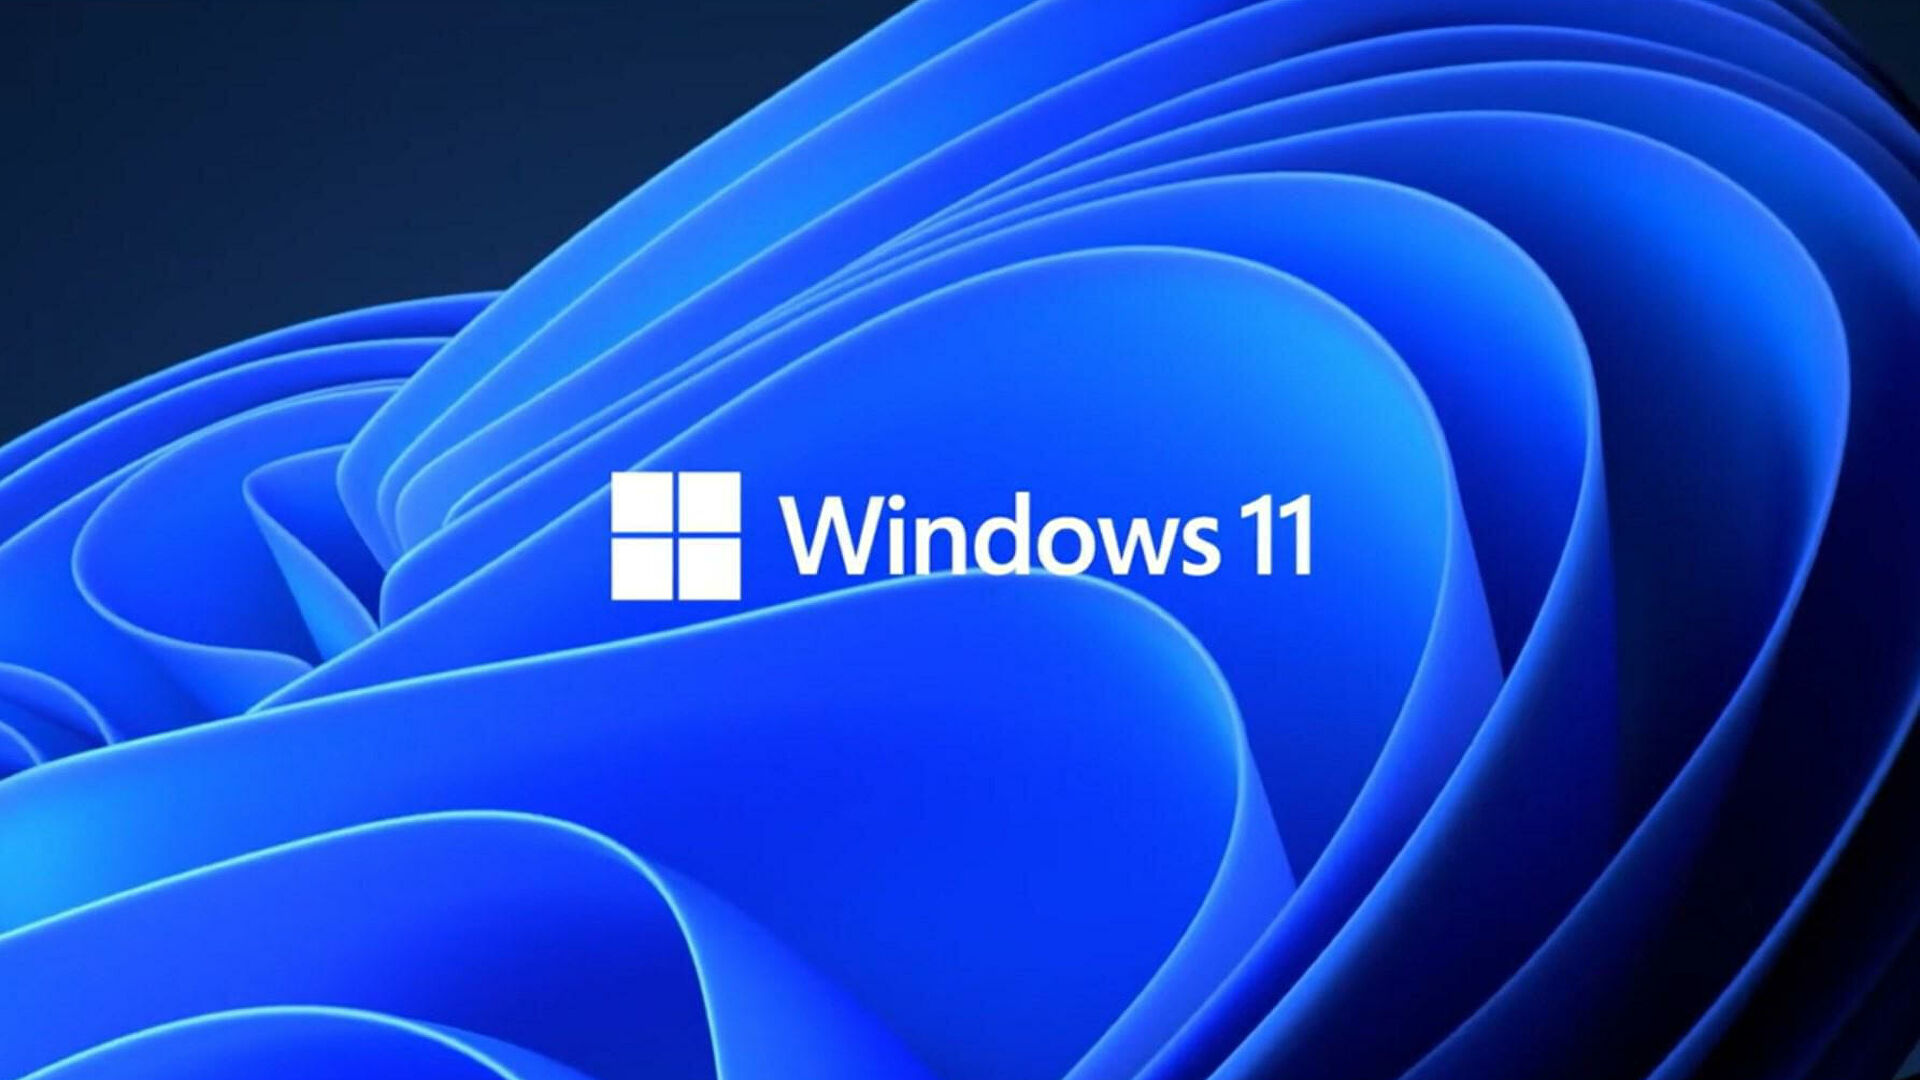 Things to know on Windows 11